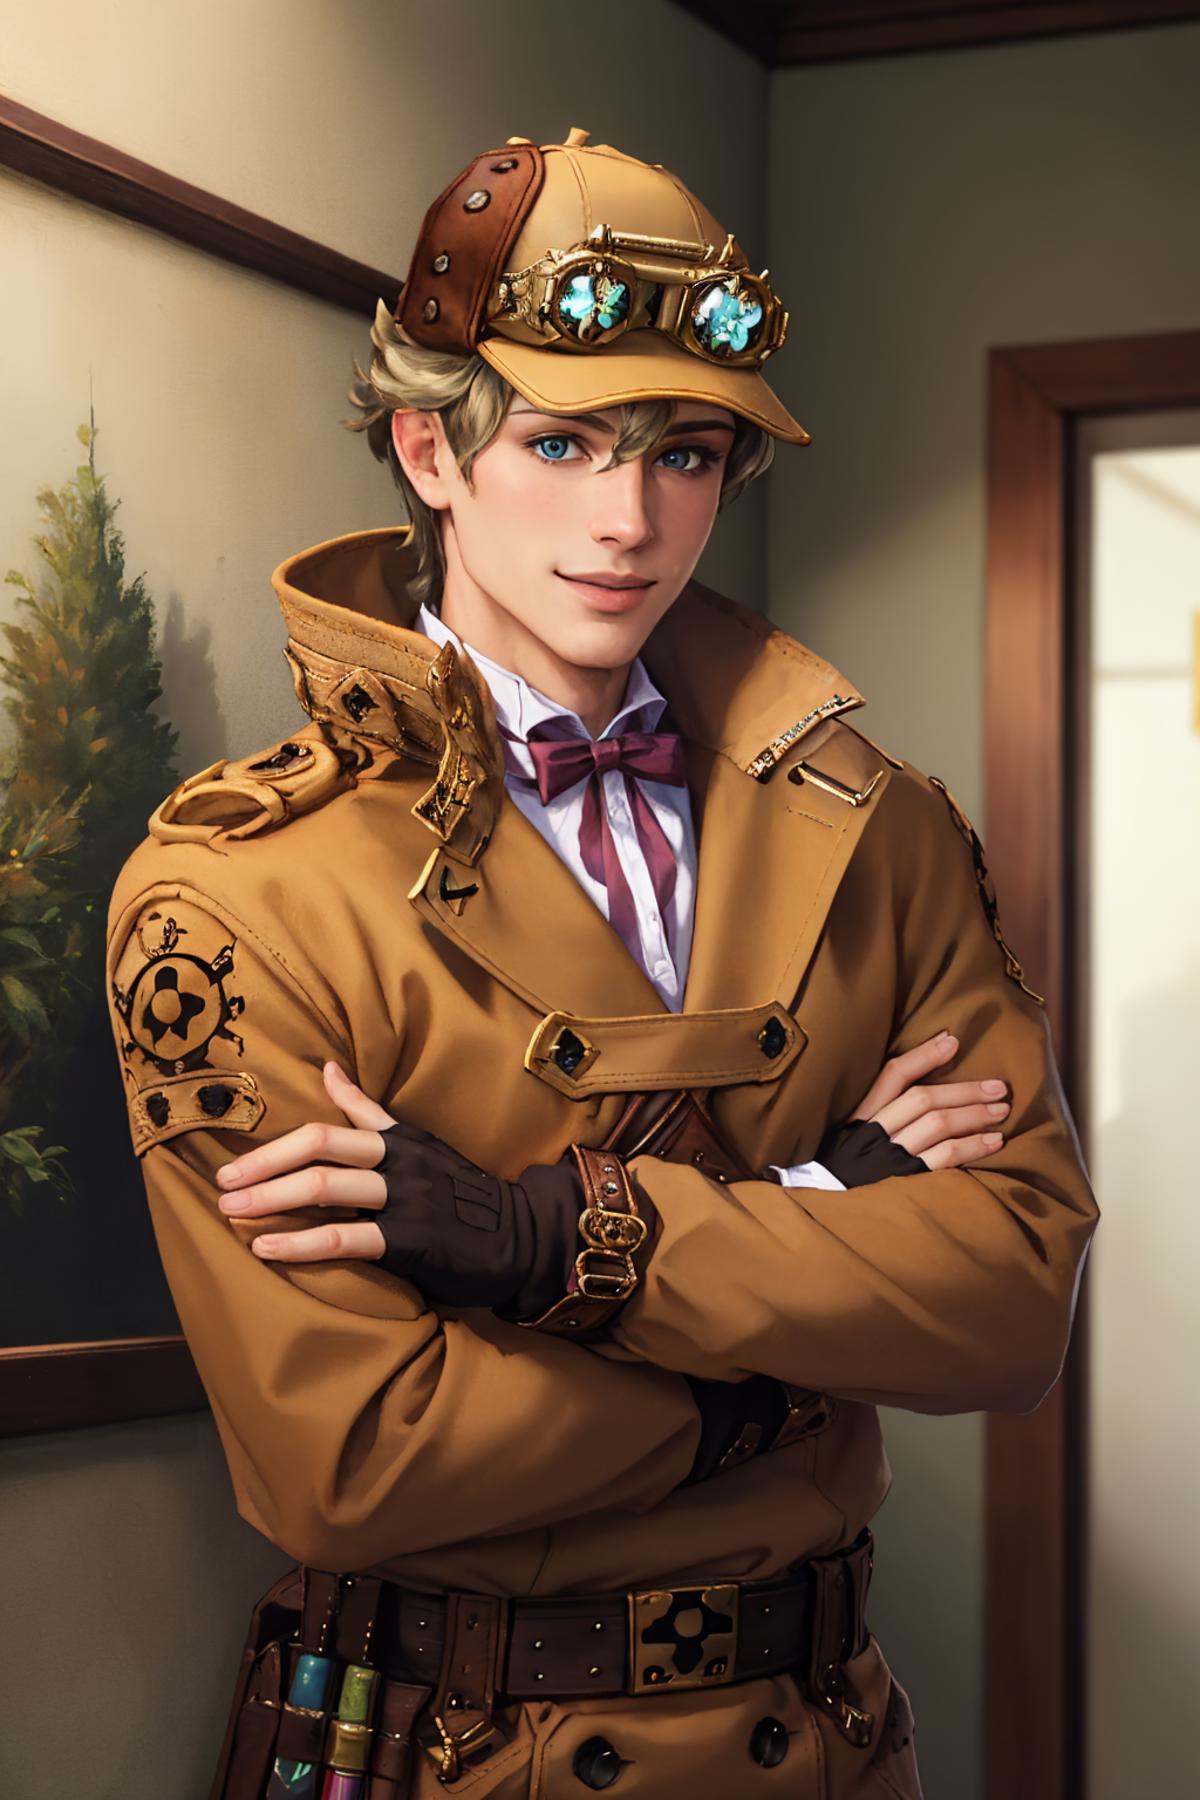 Herlock Sholmes | The Great Ace Attorney image by justTNP